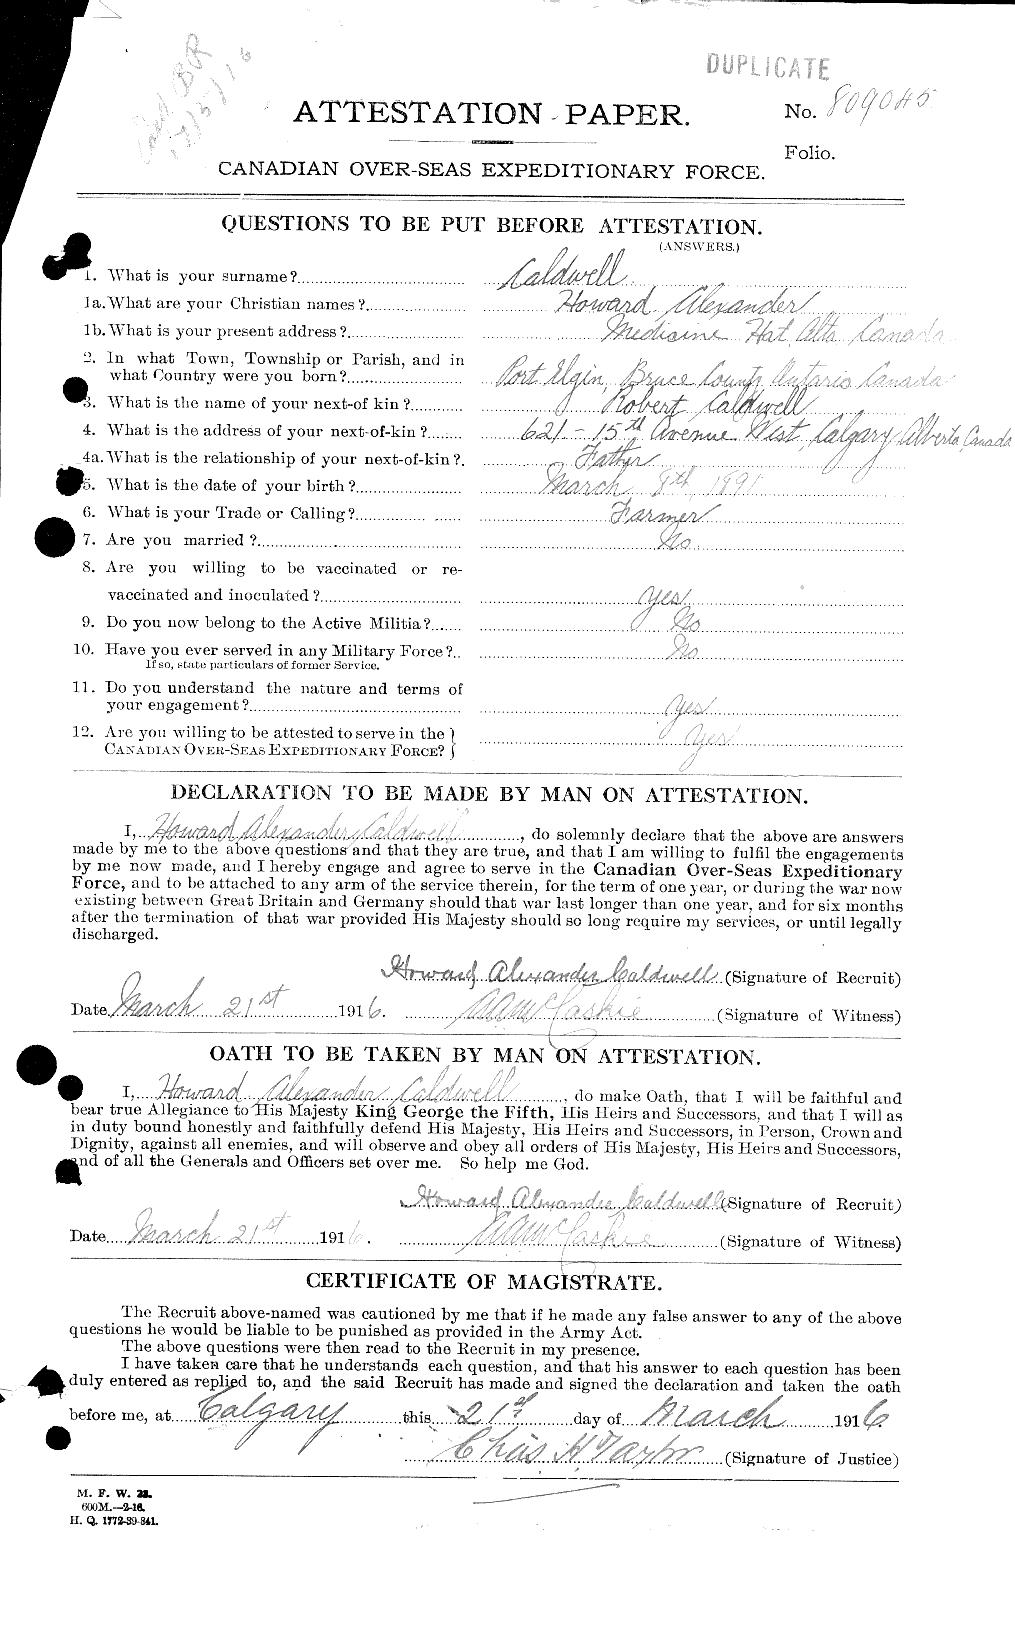 Personnel Records of the First World War - CEF 001058a